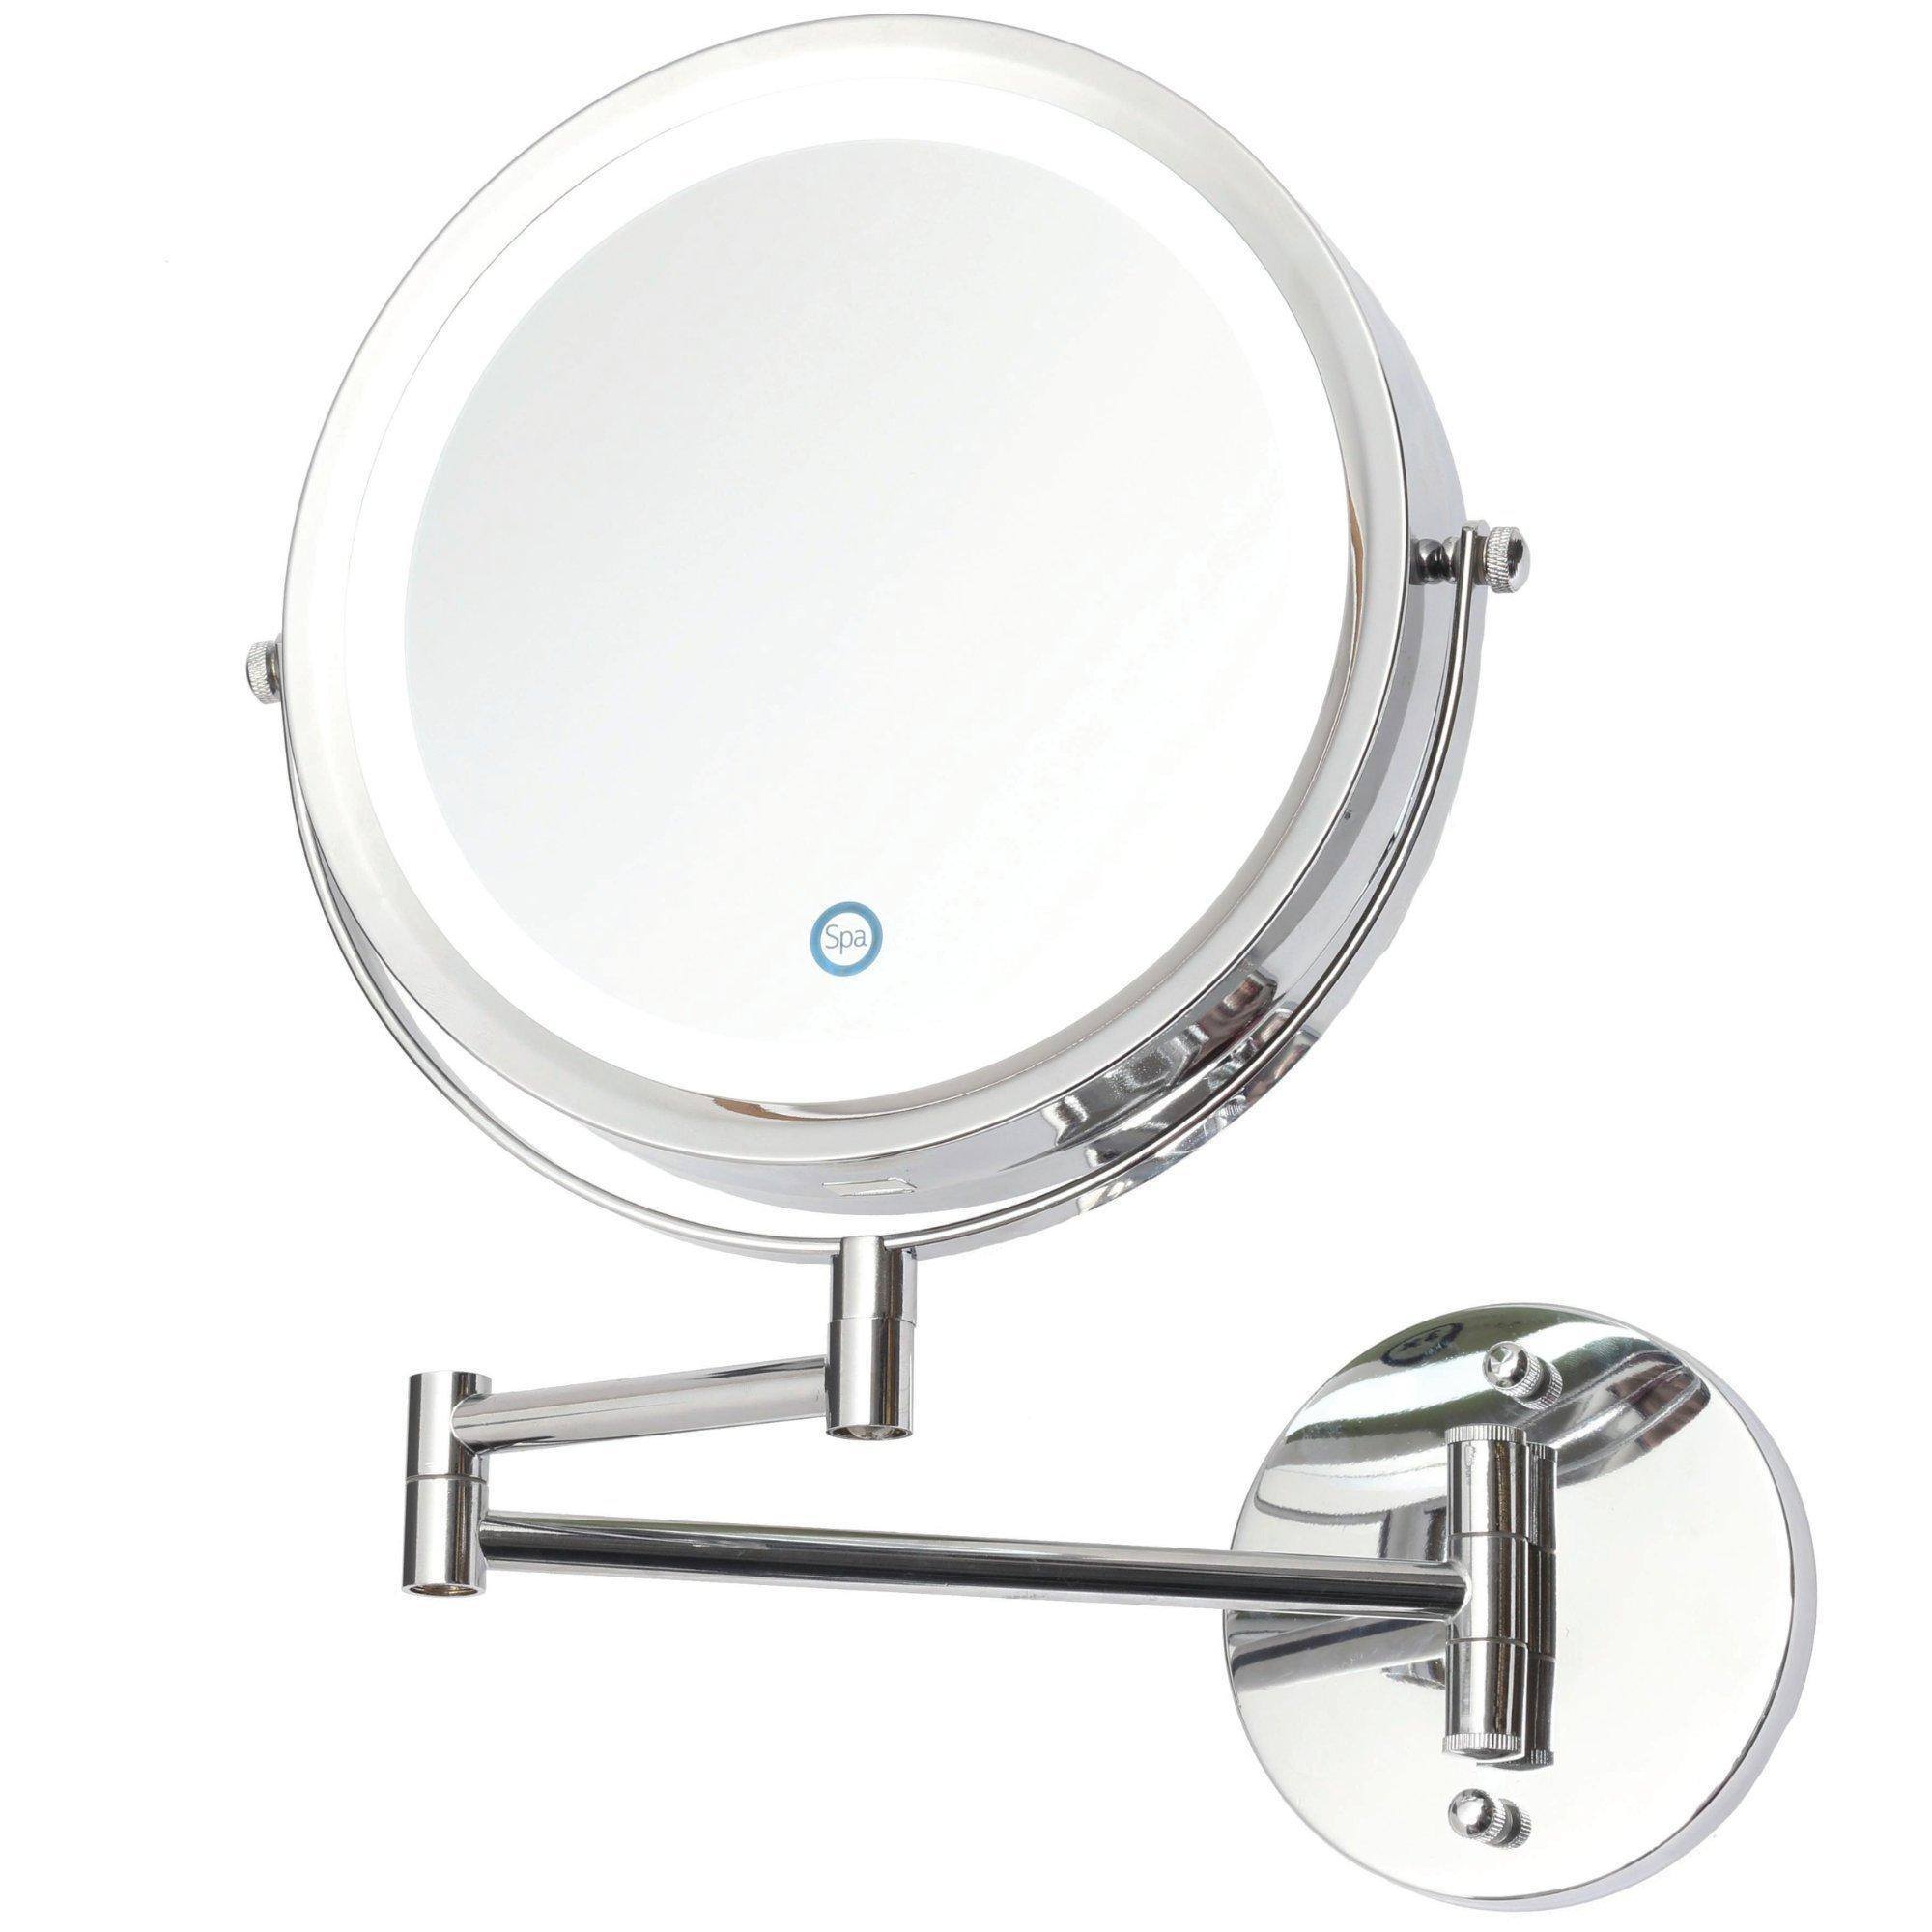 LED Bathroom Mirror - Wall Mounted & Adjustable with 17 Integrated LEDs - image 1